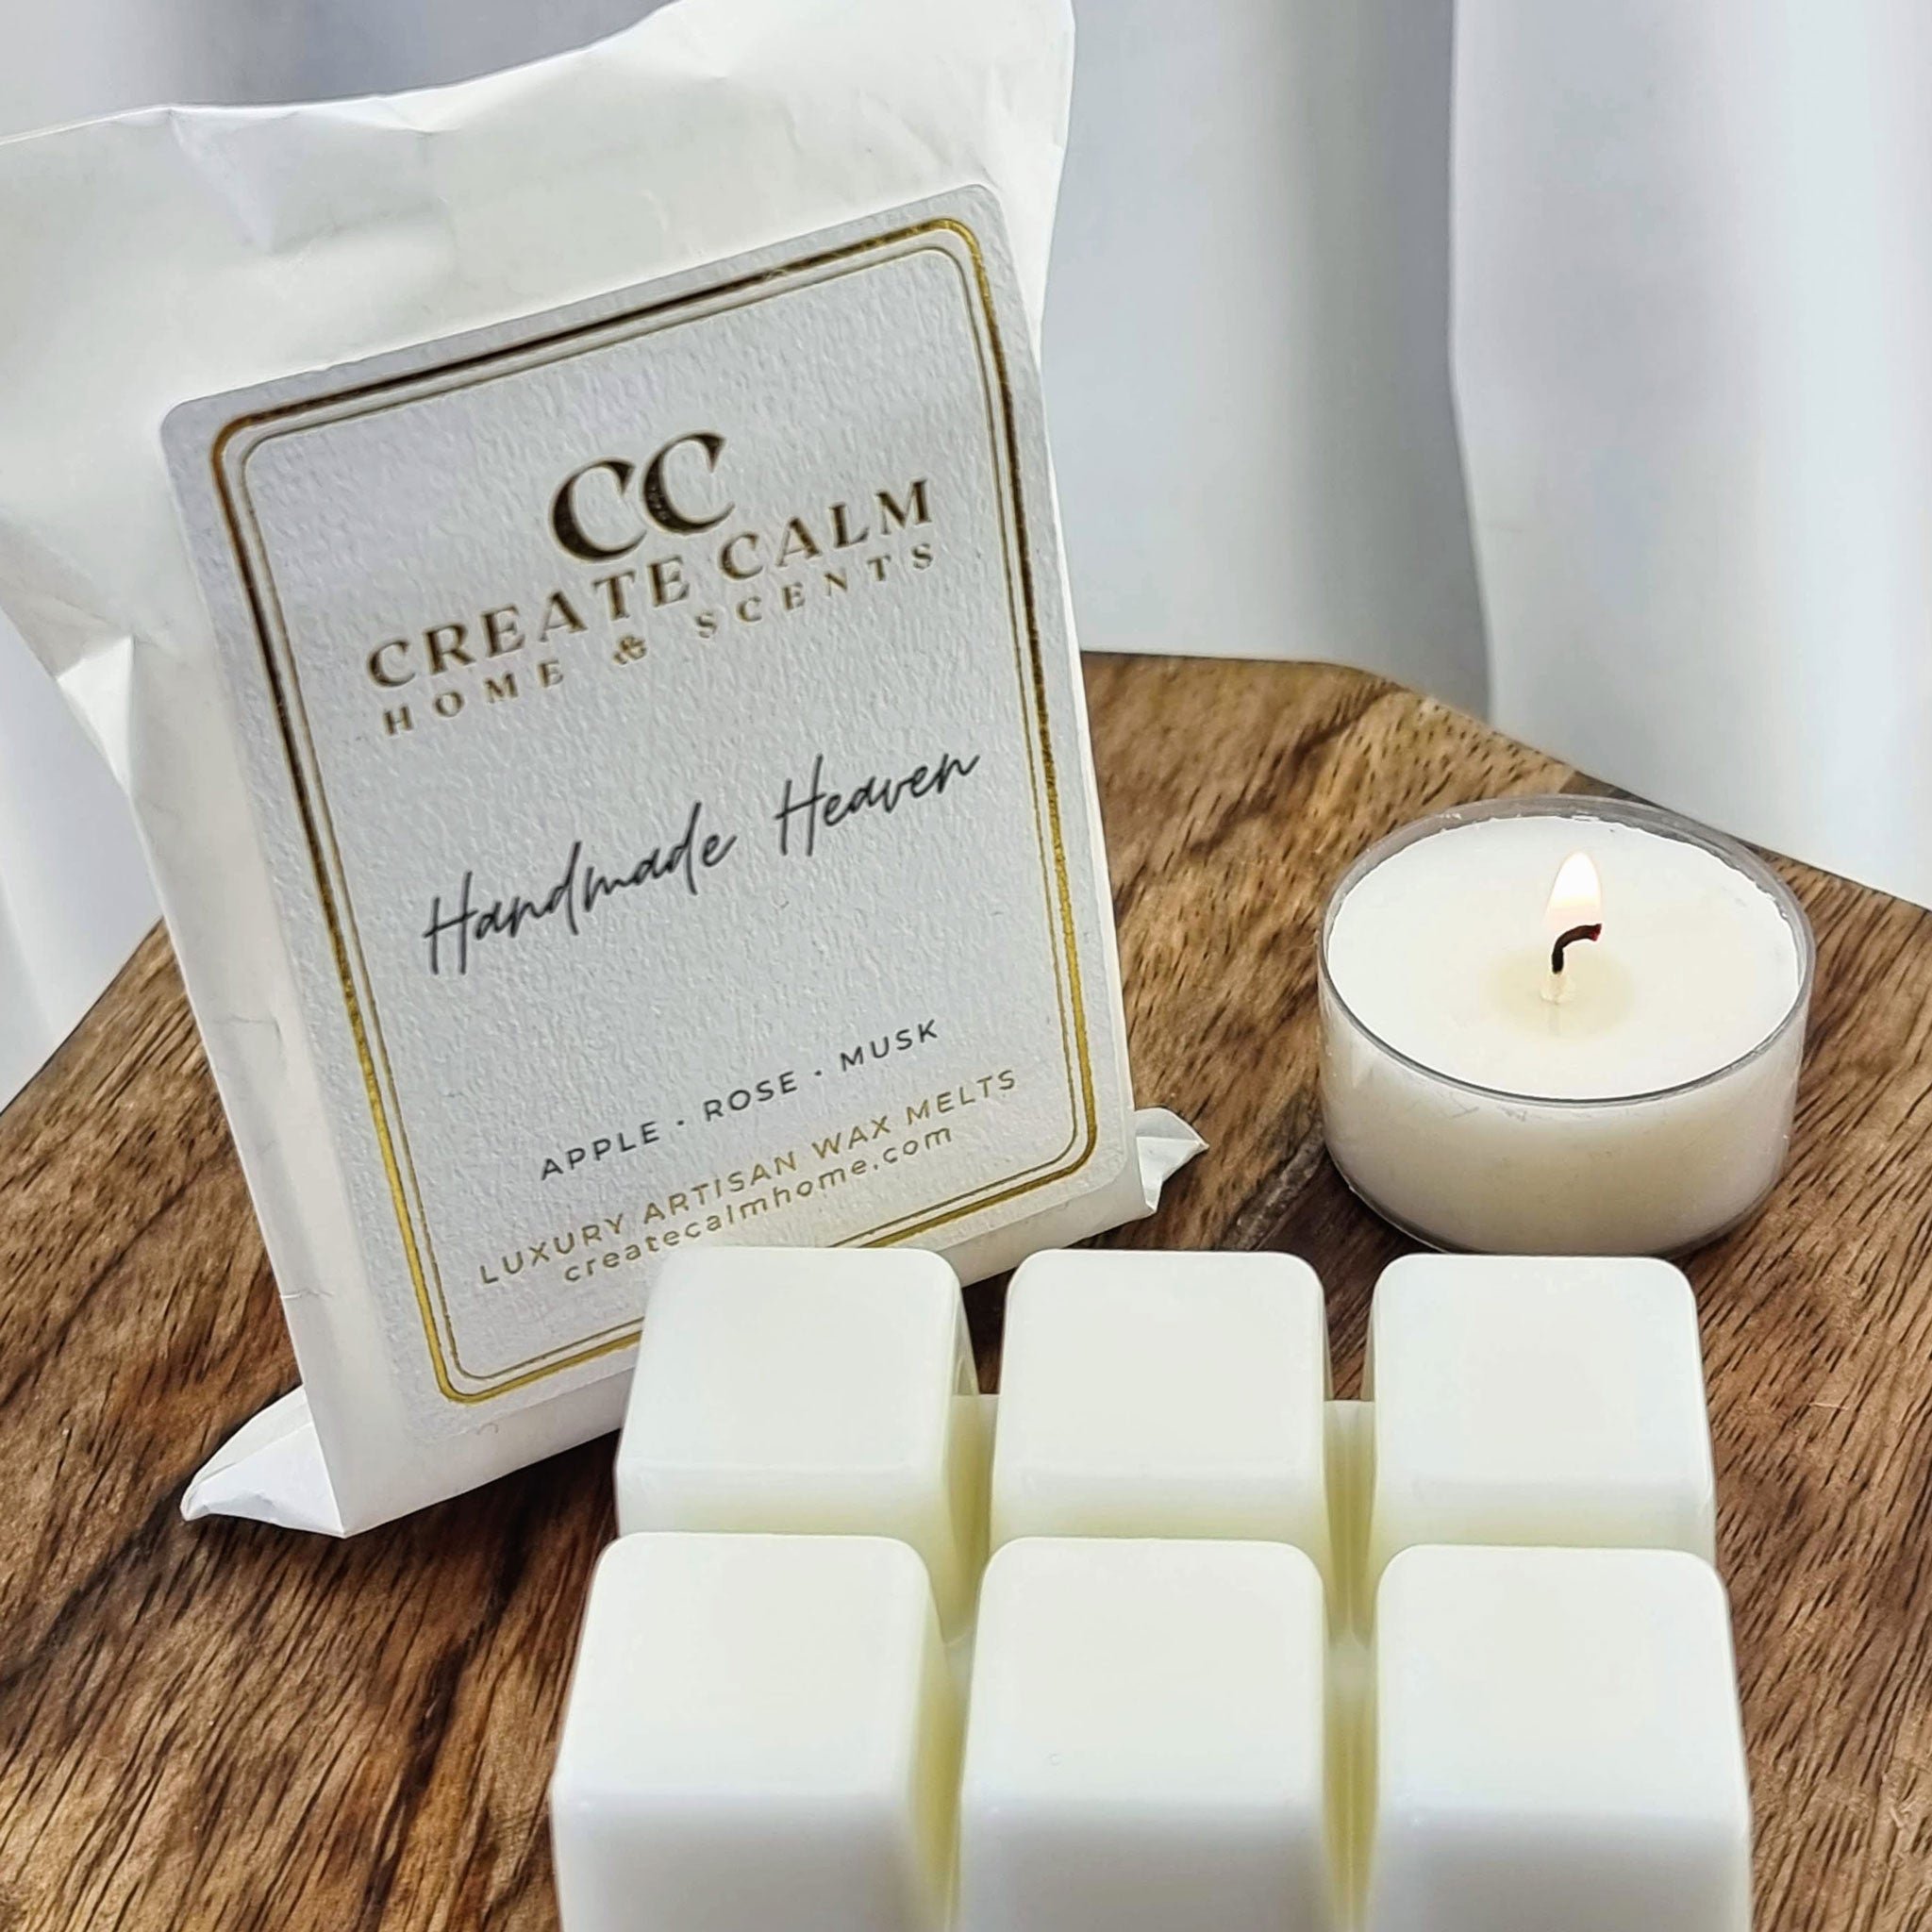 Create Calm Home & Scents, Luxury Scented Soy Wax Melts